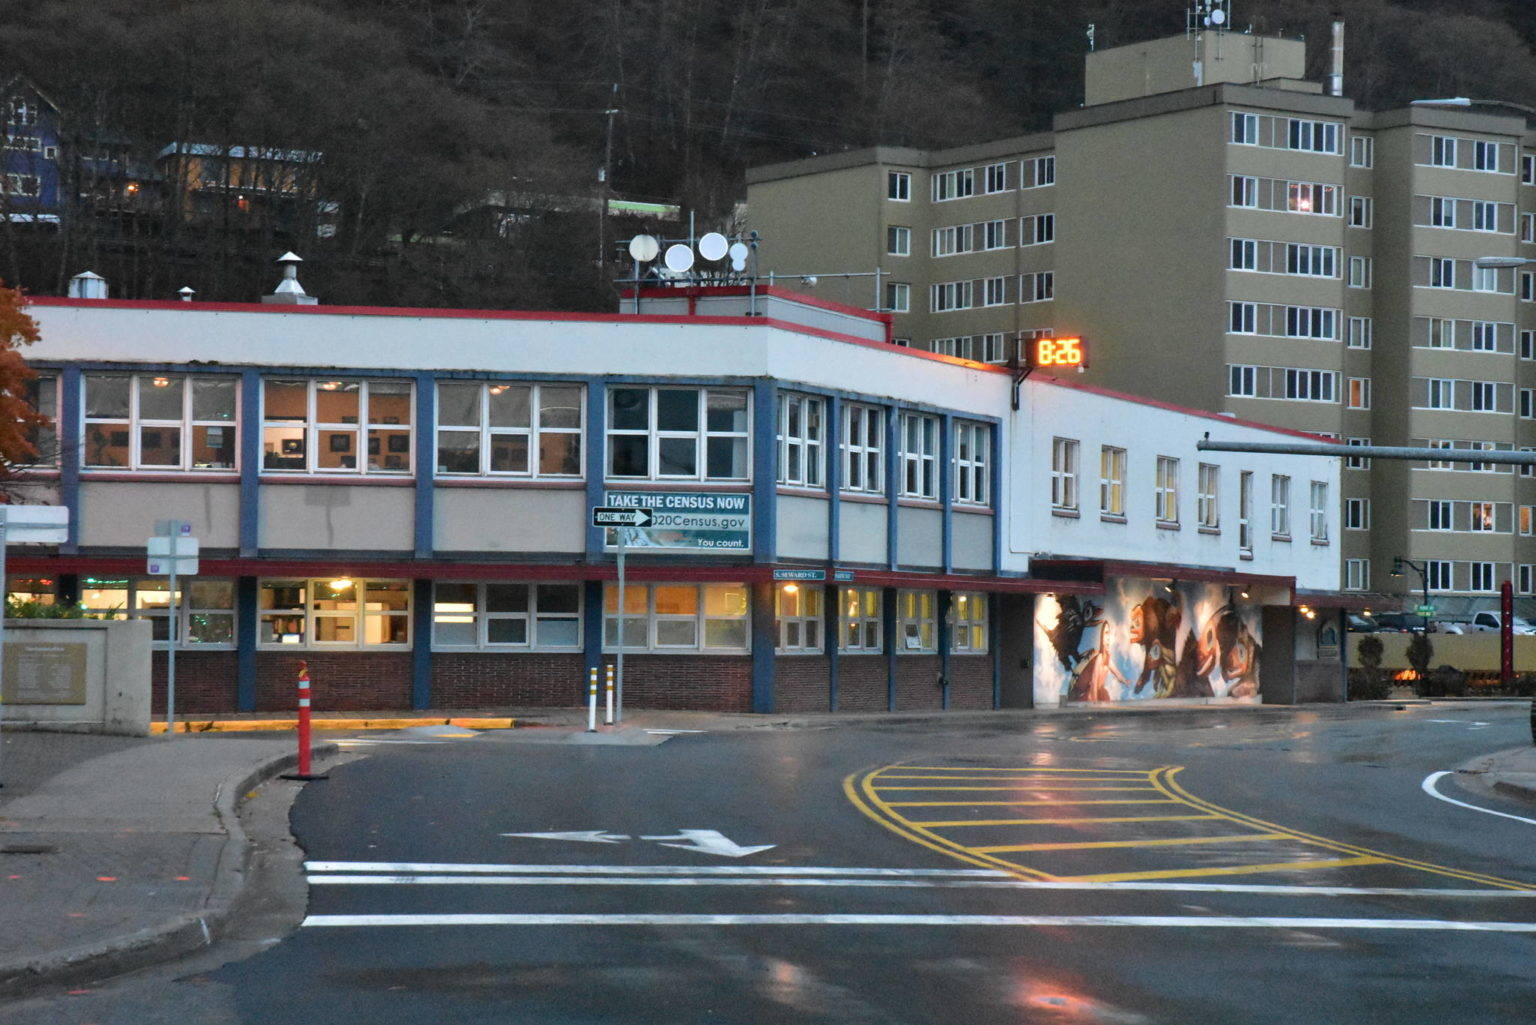 This photo shows Juneau City Hall on Tuesday, Oct. 24. The City and Borough of Juneau passed an ordinance requiring the confidential disclosure to the city assessor’s office of the sales price of real estate transactions in the borough which went into effect Monday, Nov. 30. (Peter Segall / Juneau Empire)